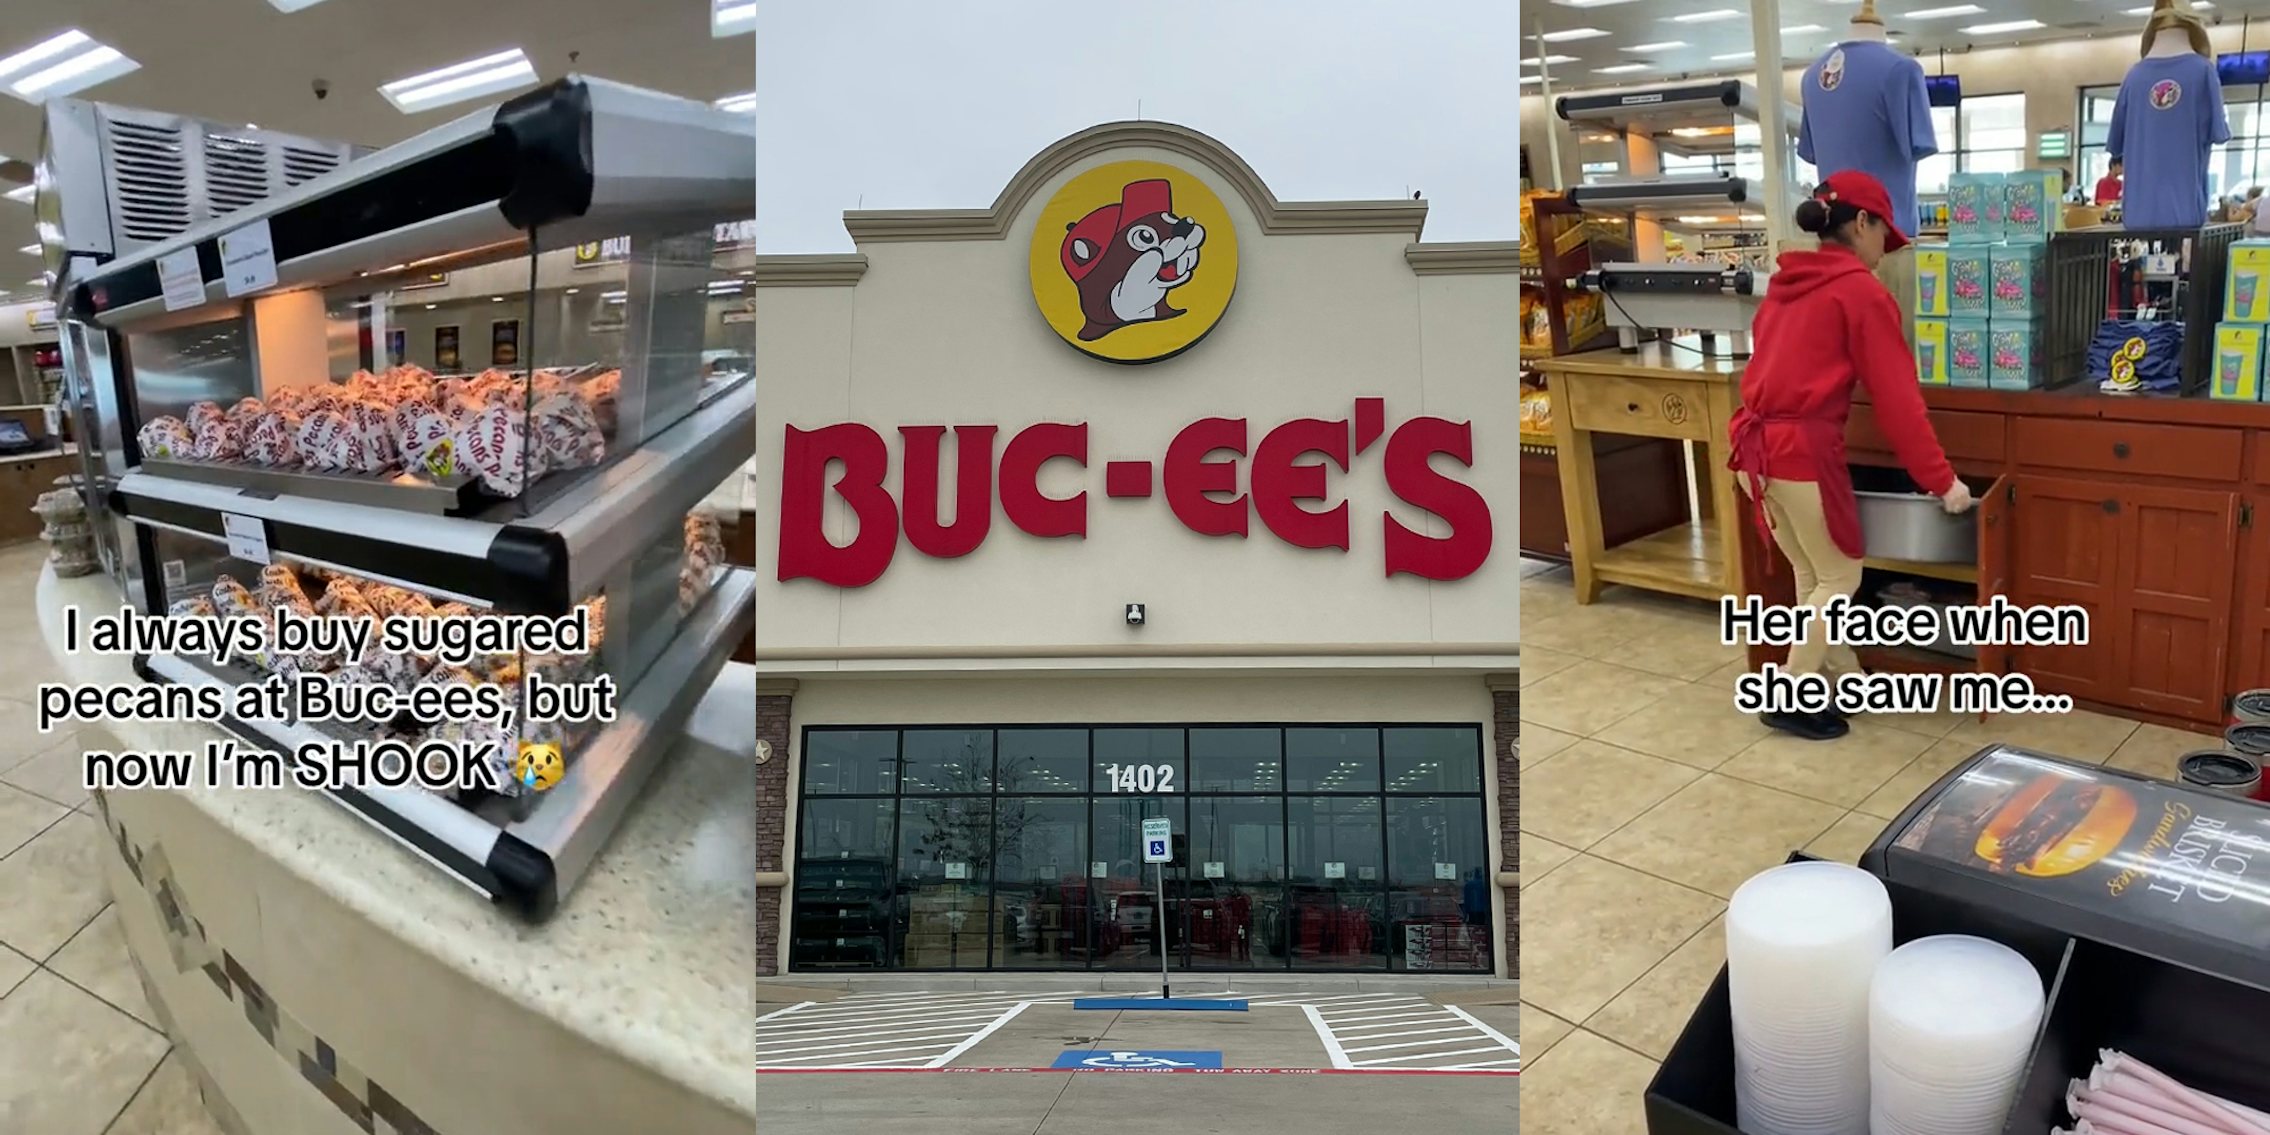 sugared pecans in heat case display at Buc-ee's with caption 'I always buy sugared pecans at Buc-ee's, but now I'm SHOOK' (l) Buc-ee's building with sign (c) Buc-ee's employee putting tray of sugared pecans into cupboard with caption 'Her face when she saw me...' (r)